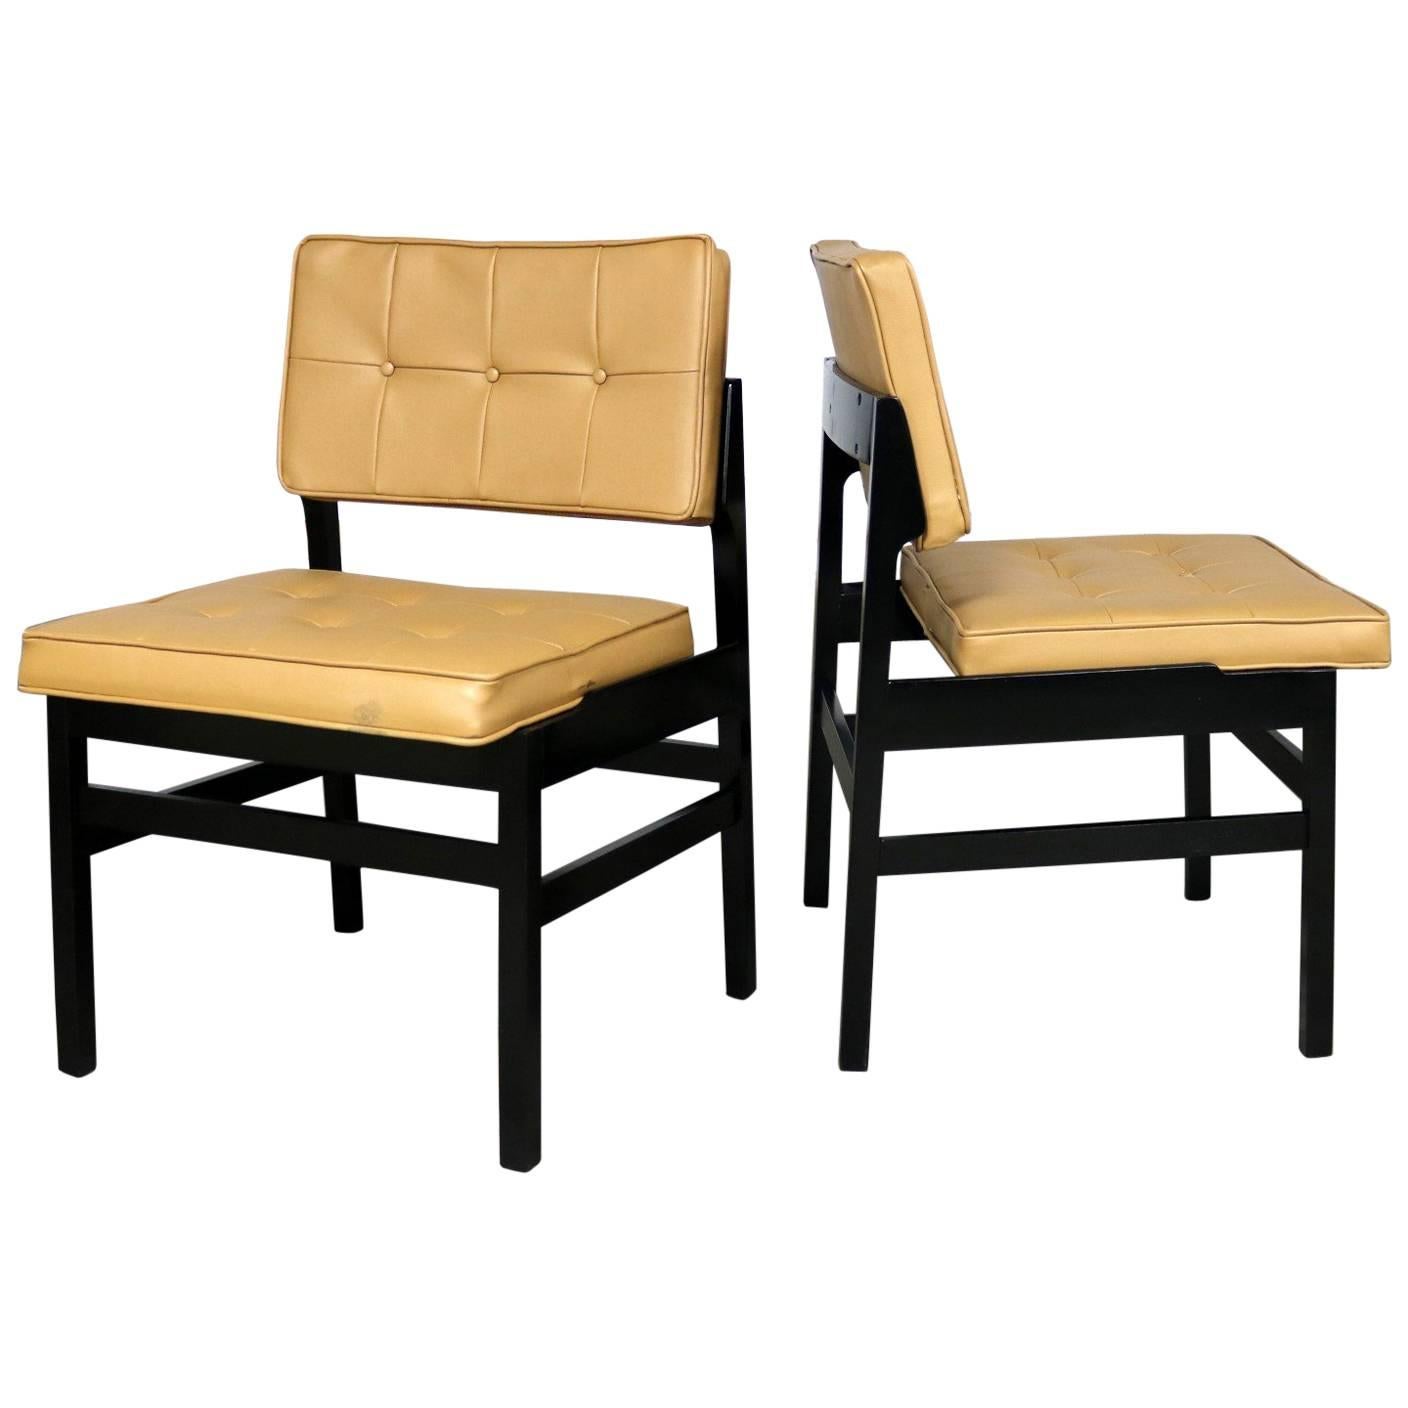 Pair of Hibriten Blackened Wood and Faux Leather Mid-Century Modern Chairs For Sale